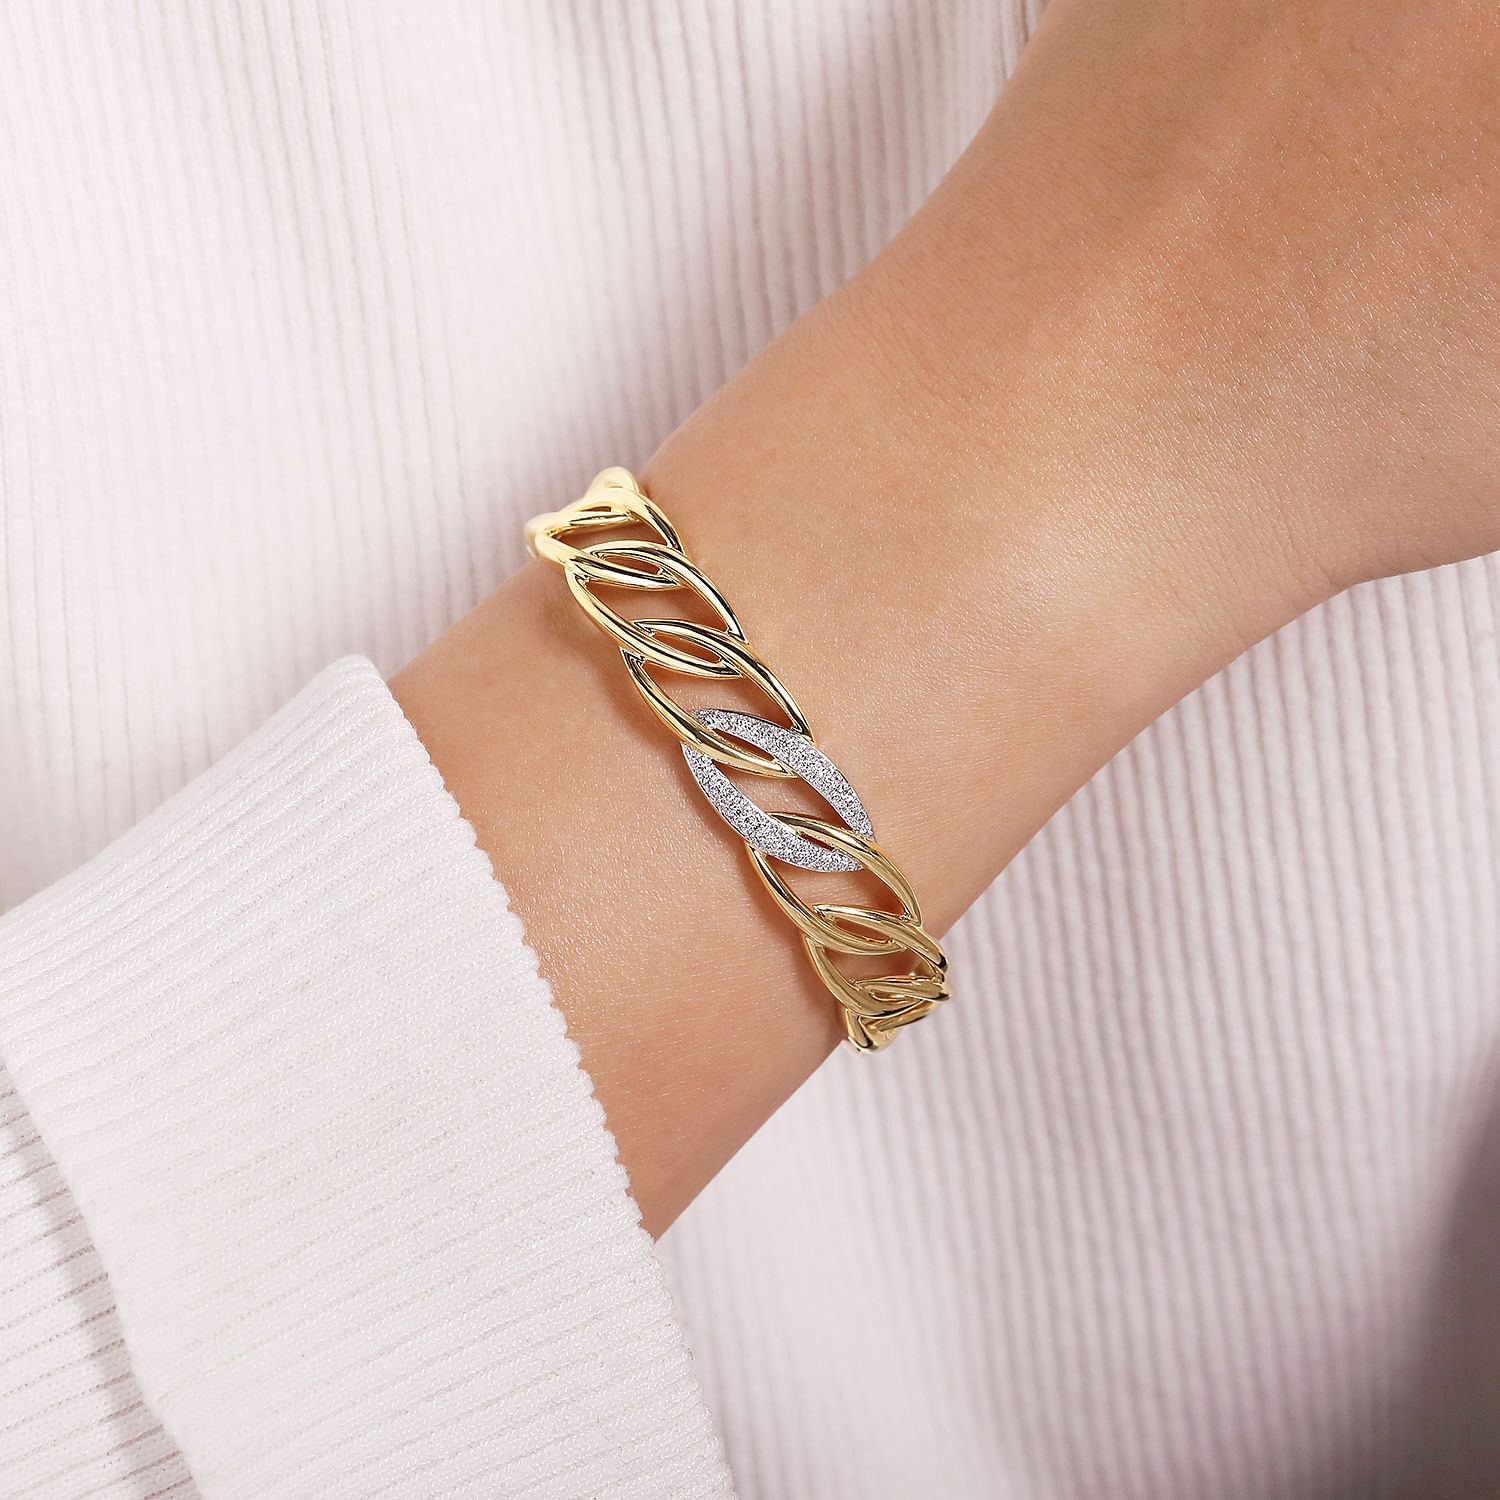 14K Yellow Gold Chain Link Cuff Bracelet with White Gold Pave Diamond Station - 0.42 ct - Shot 4